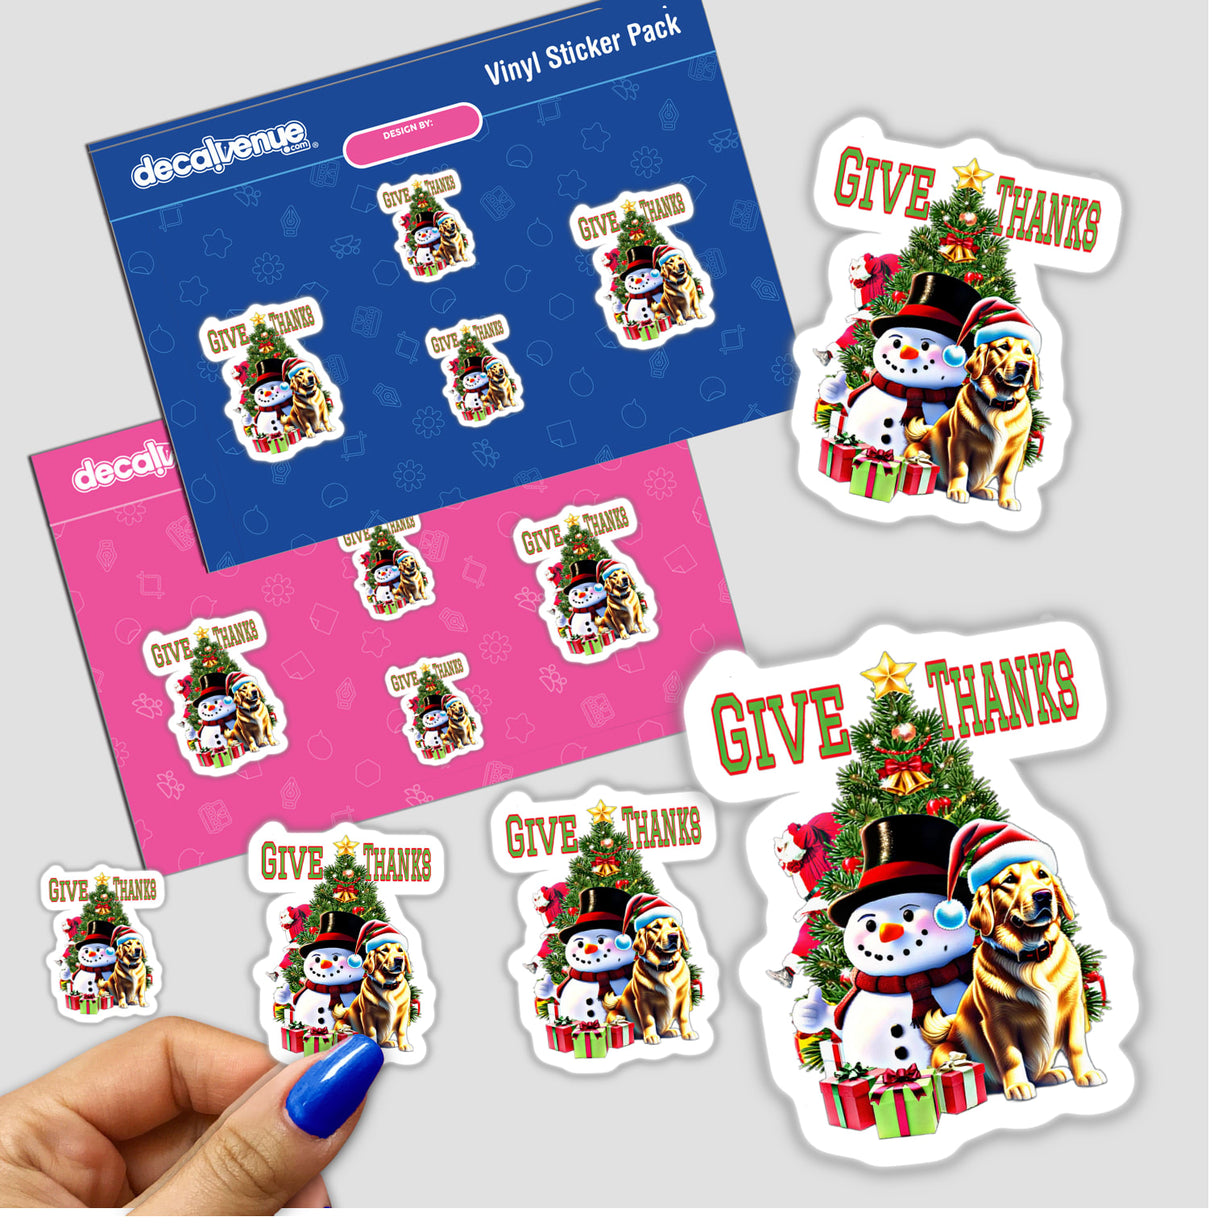 Golden Retriever Christmas stickers featuring a dog wearing a Santa hat and festive elements like a Christmas tree and snowman. Available as stickers or digital artwork from Decal Venue.